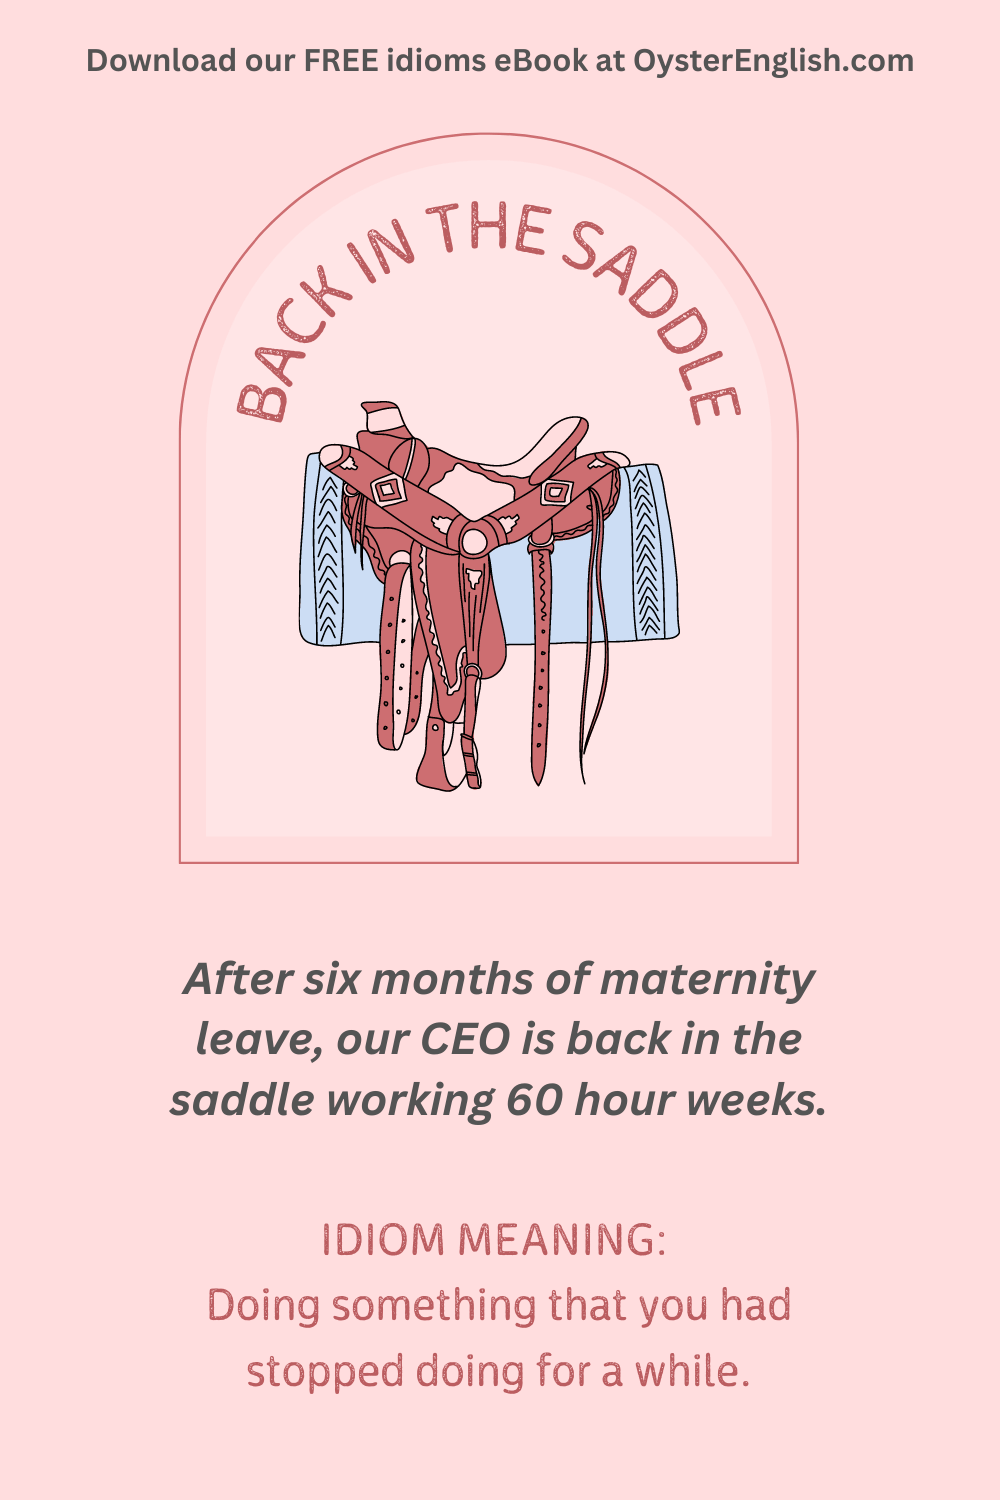 Idiom back in the saddle beans doing something you'd stopped doing for awhile. Picture of pink horse saddle. "After 6 months of maternity leave, our CEO is back in the saddle working 60 hour weeks."